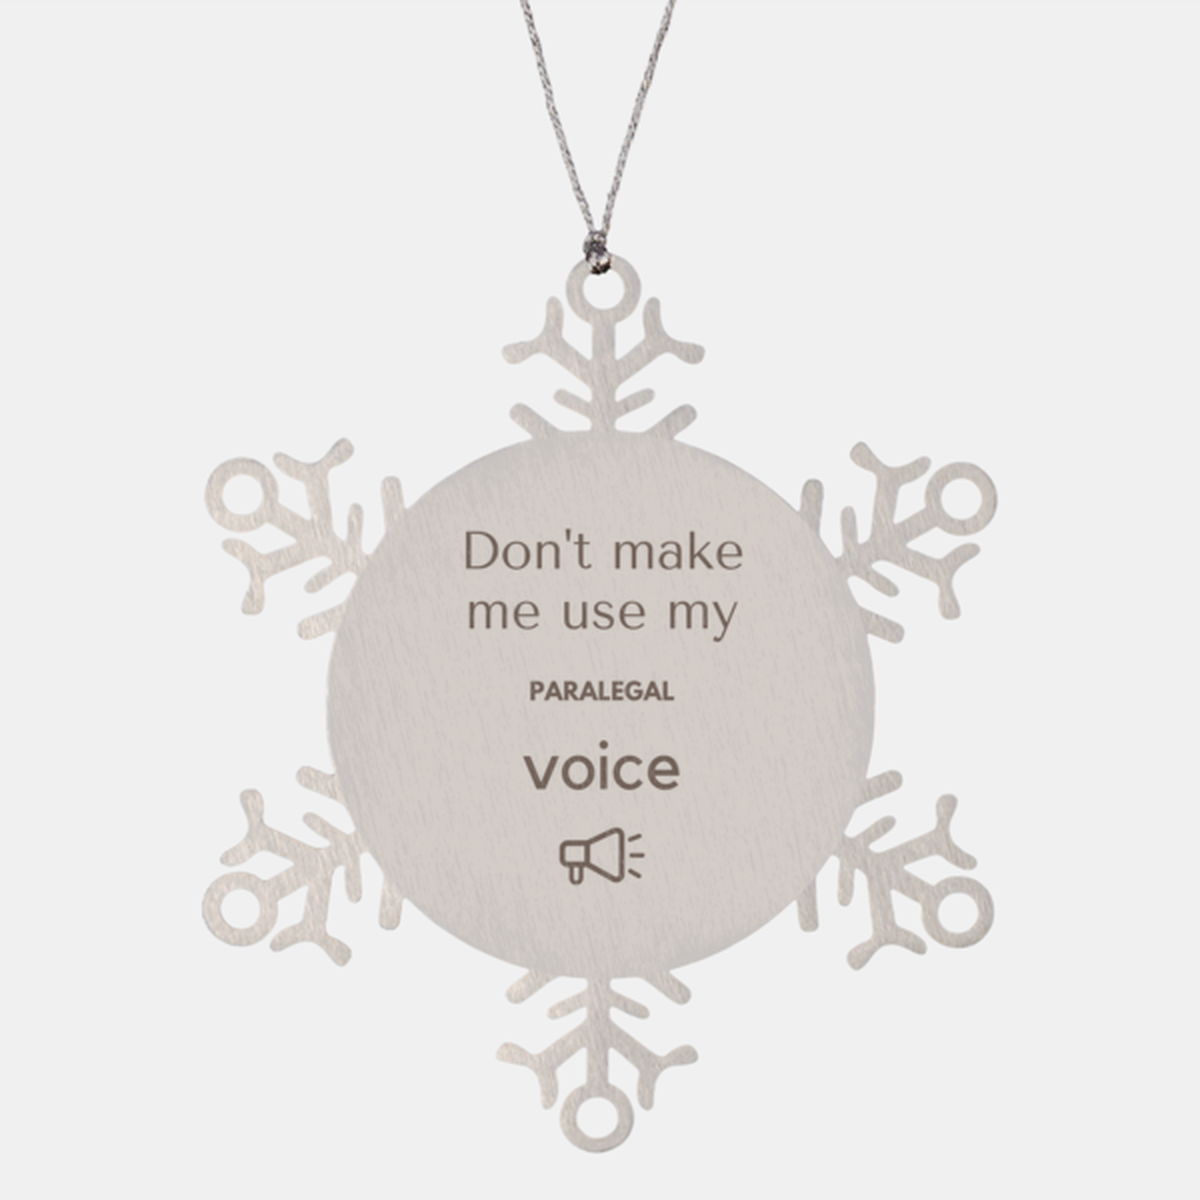 Don't make me use my Paralegal voice, Sarcasm Paralegal Ornament Gifts, Christmas Paralegal Snowflake Ornament Unique Gifts For Paralegal Coworkers, Men, Women, Colleague, Friends